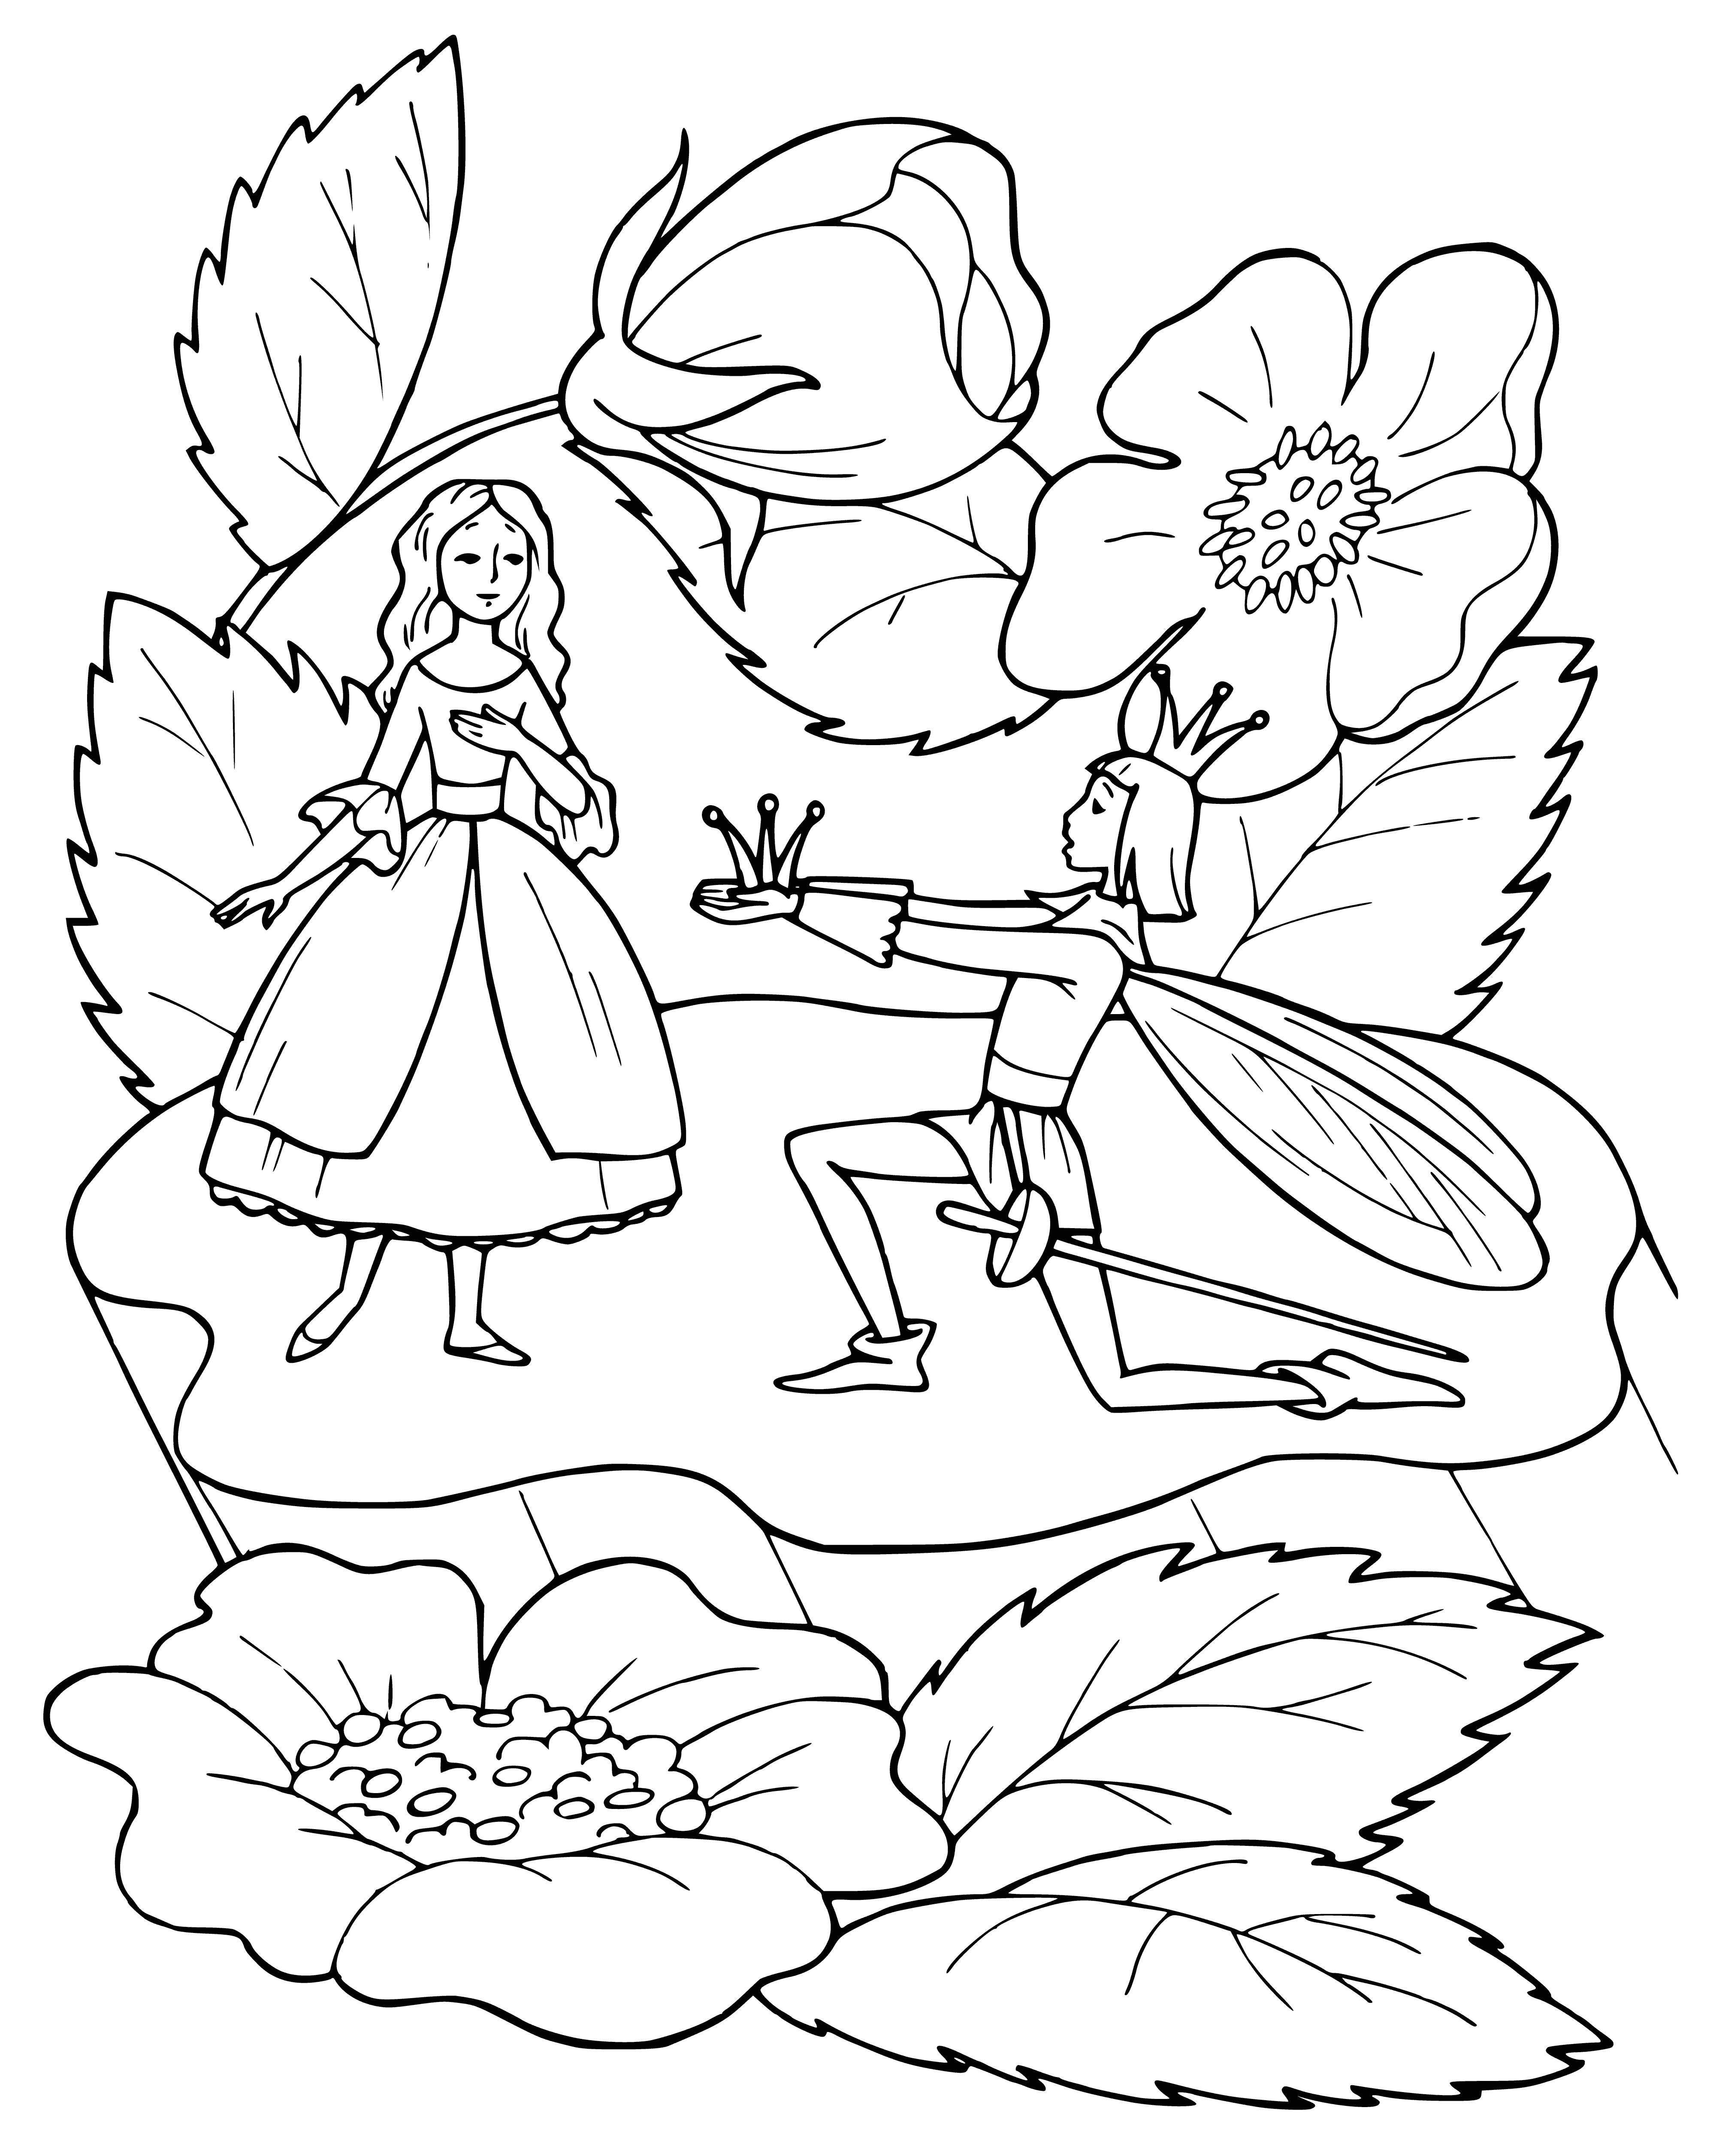 Prince kneeling before Thumbelina coloring page